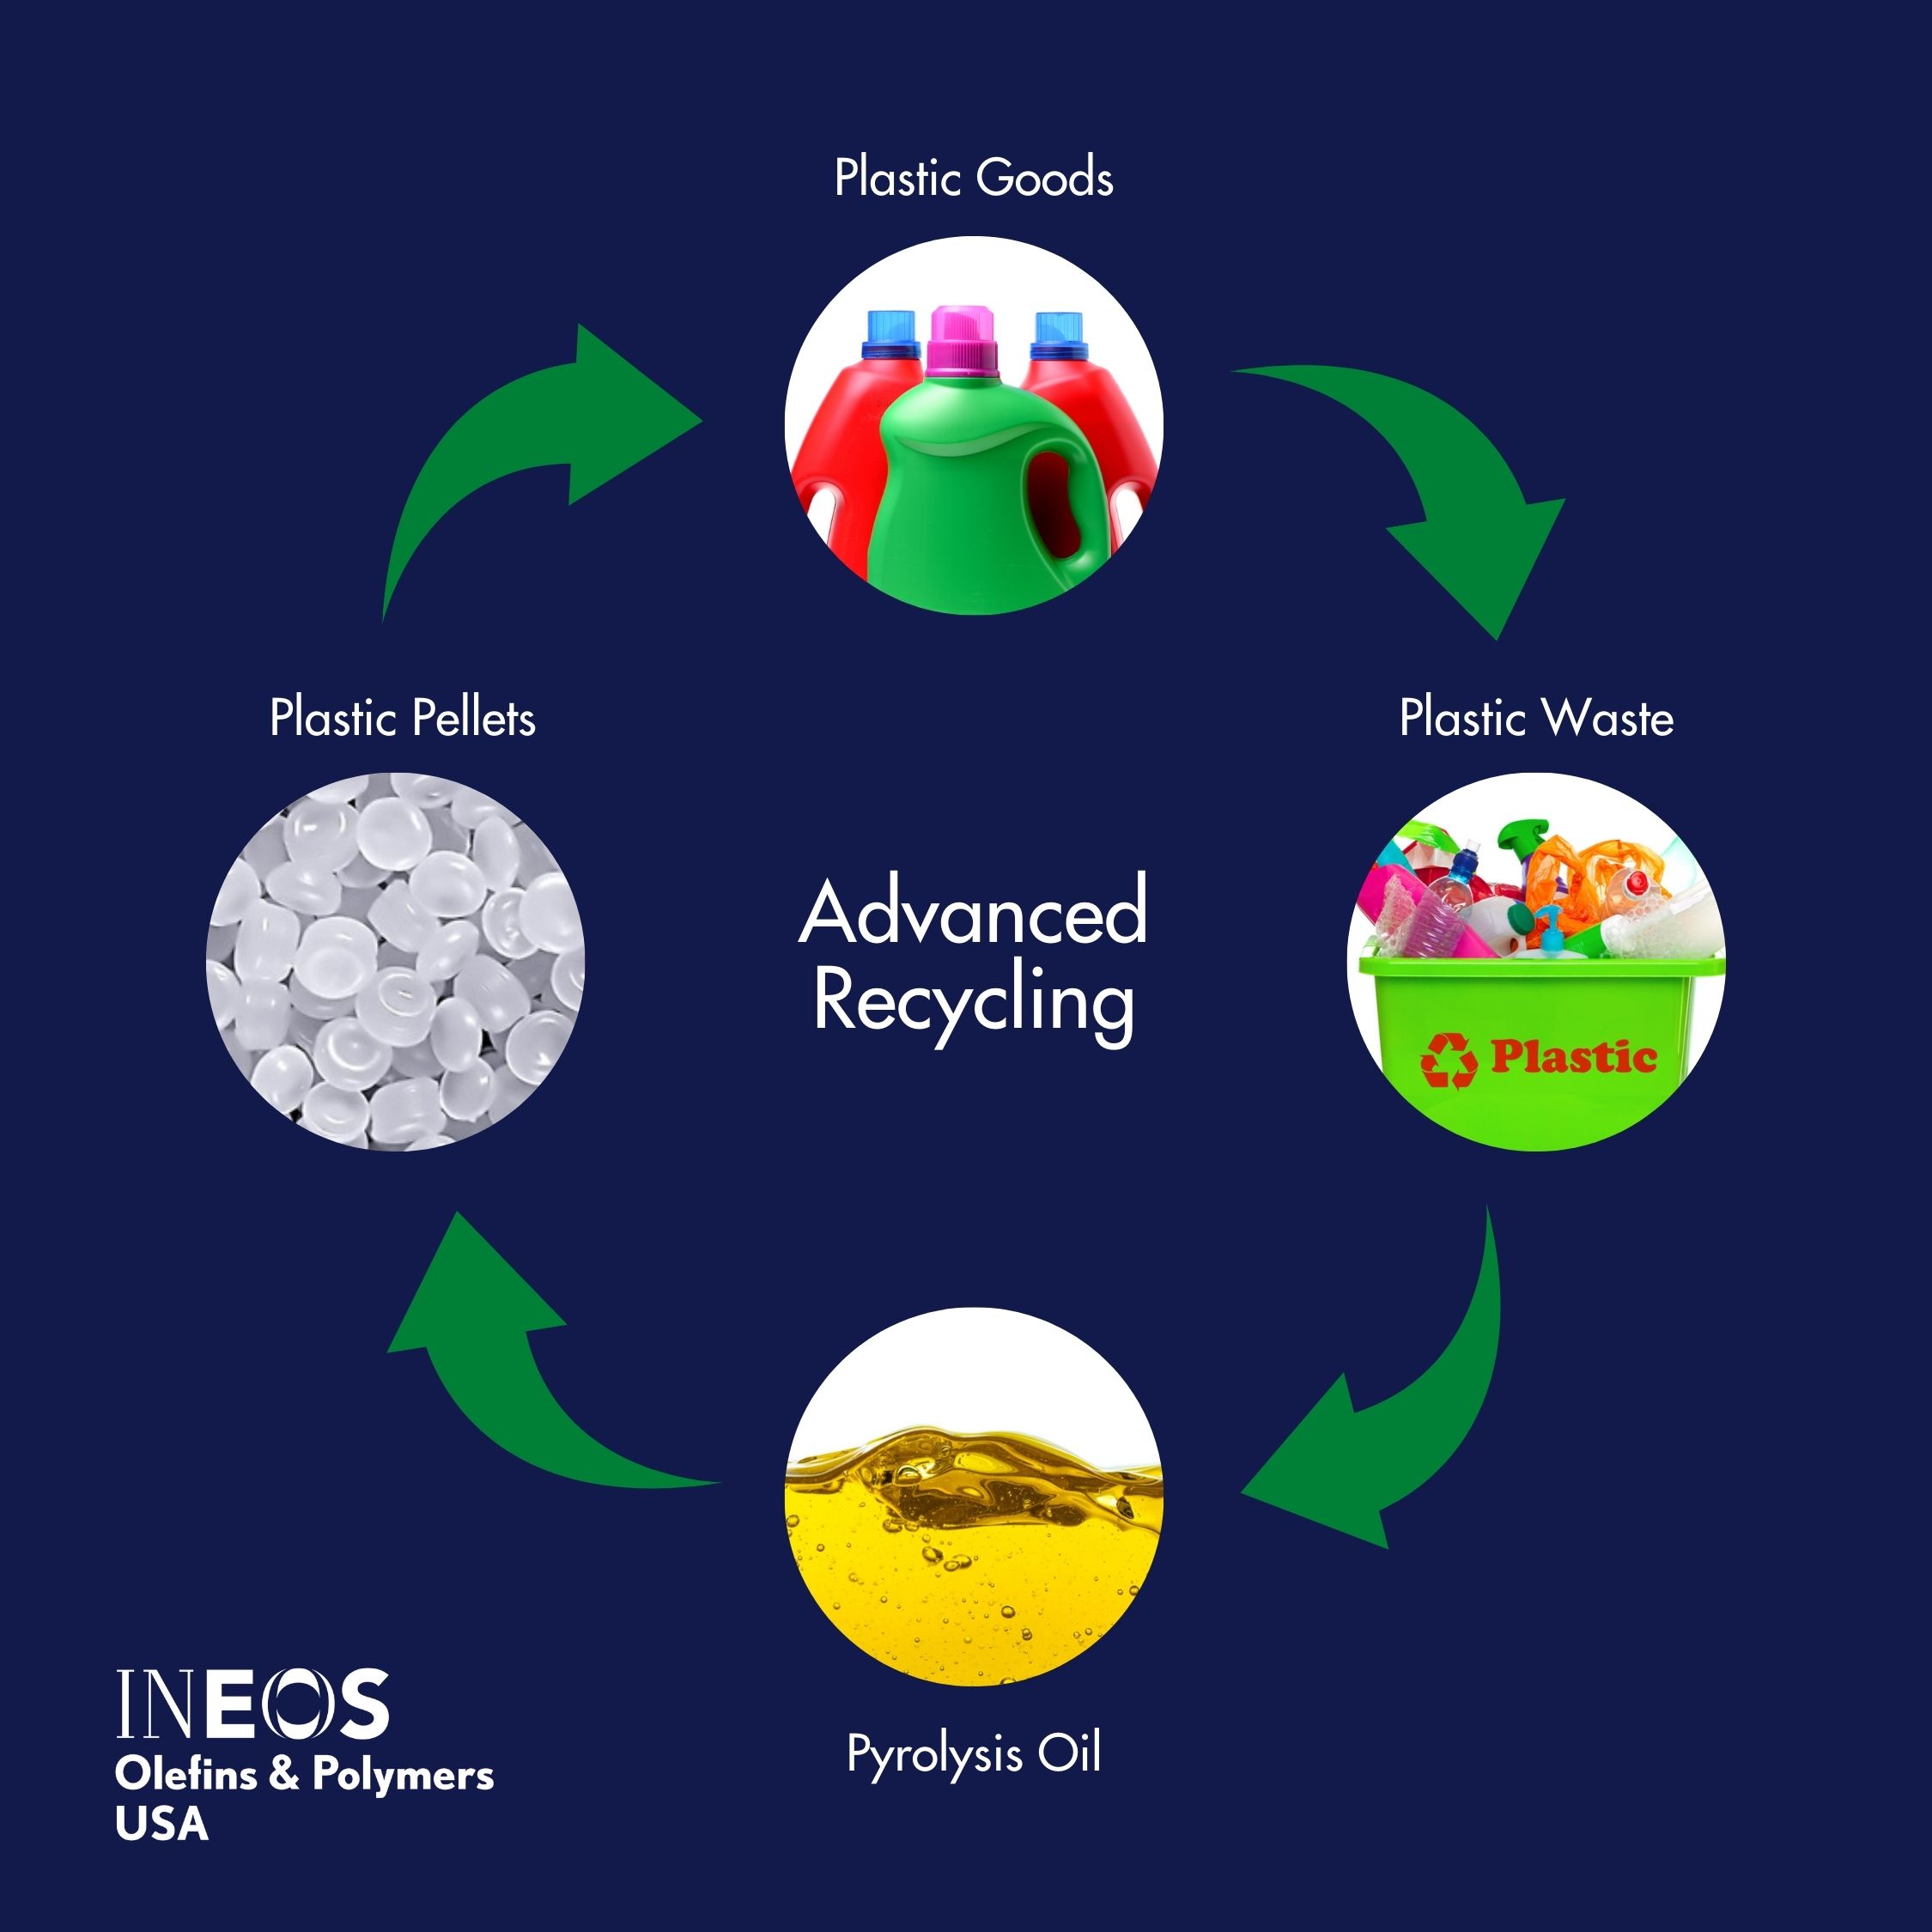 Advanced recycling converts waste plastic destined for landfill, back into a liquid raw material for use again in next generation plastic production.